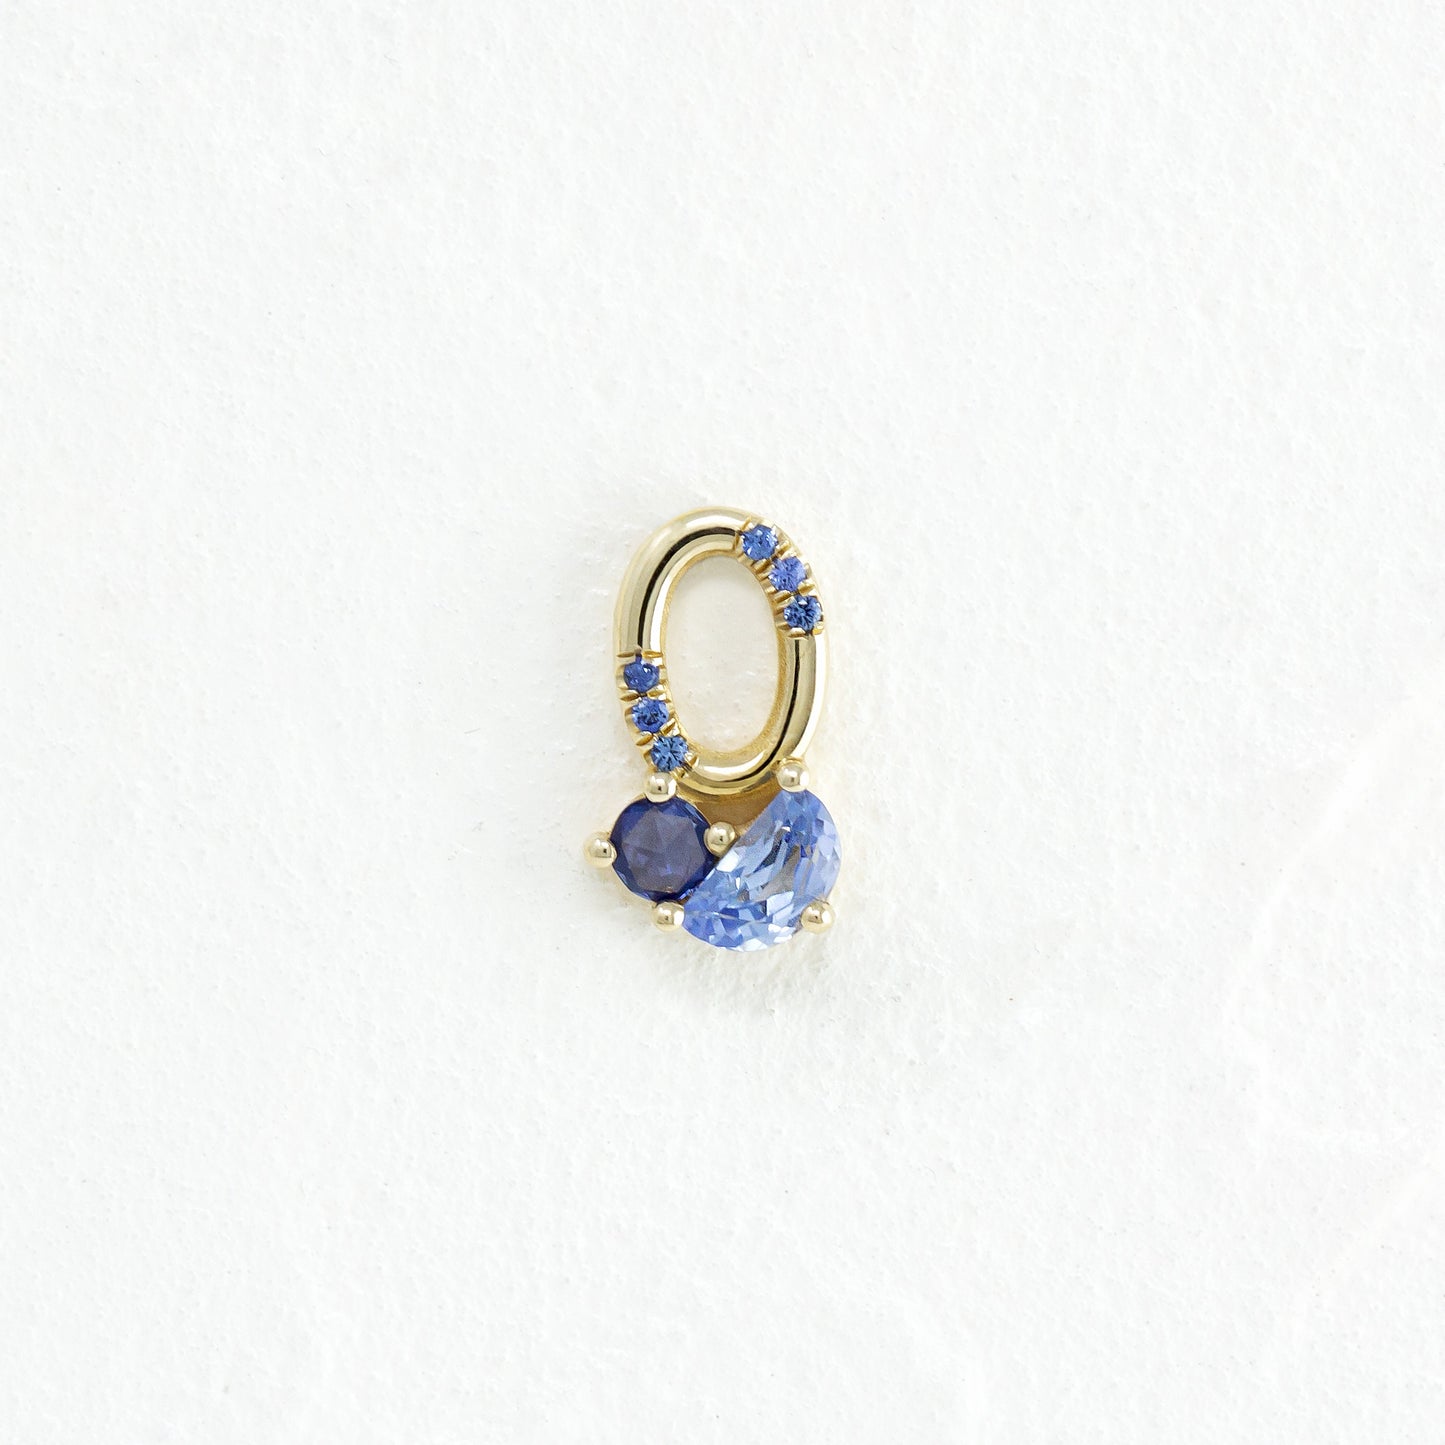 Forget-me-not Earring (Single)